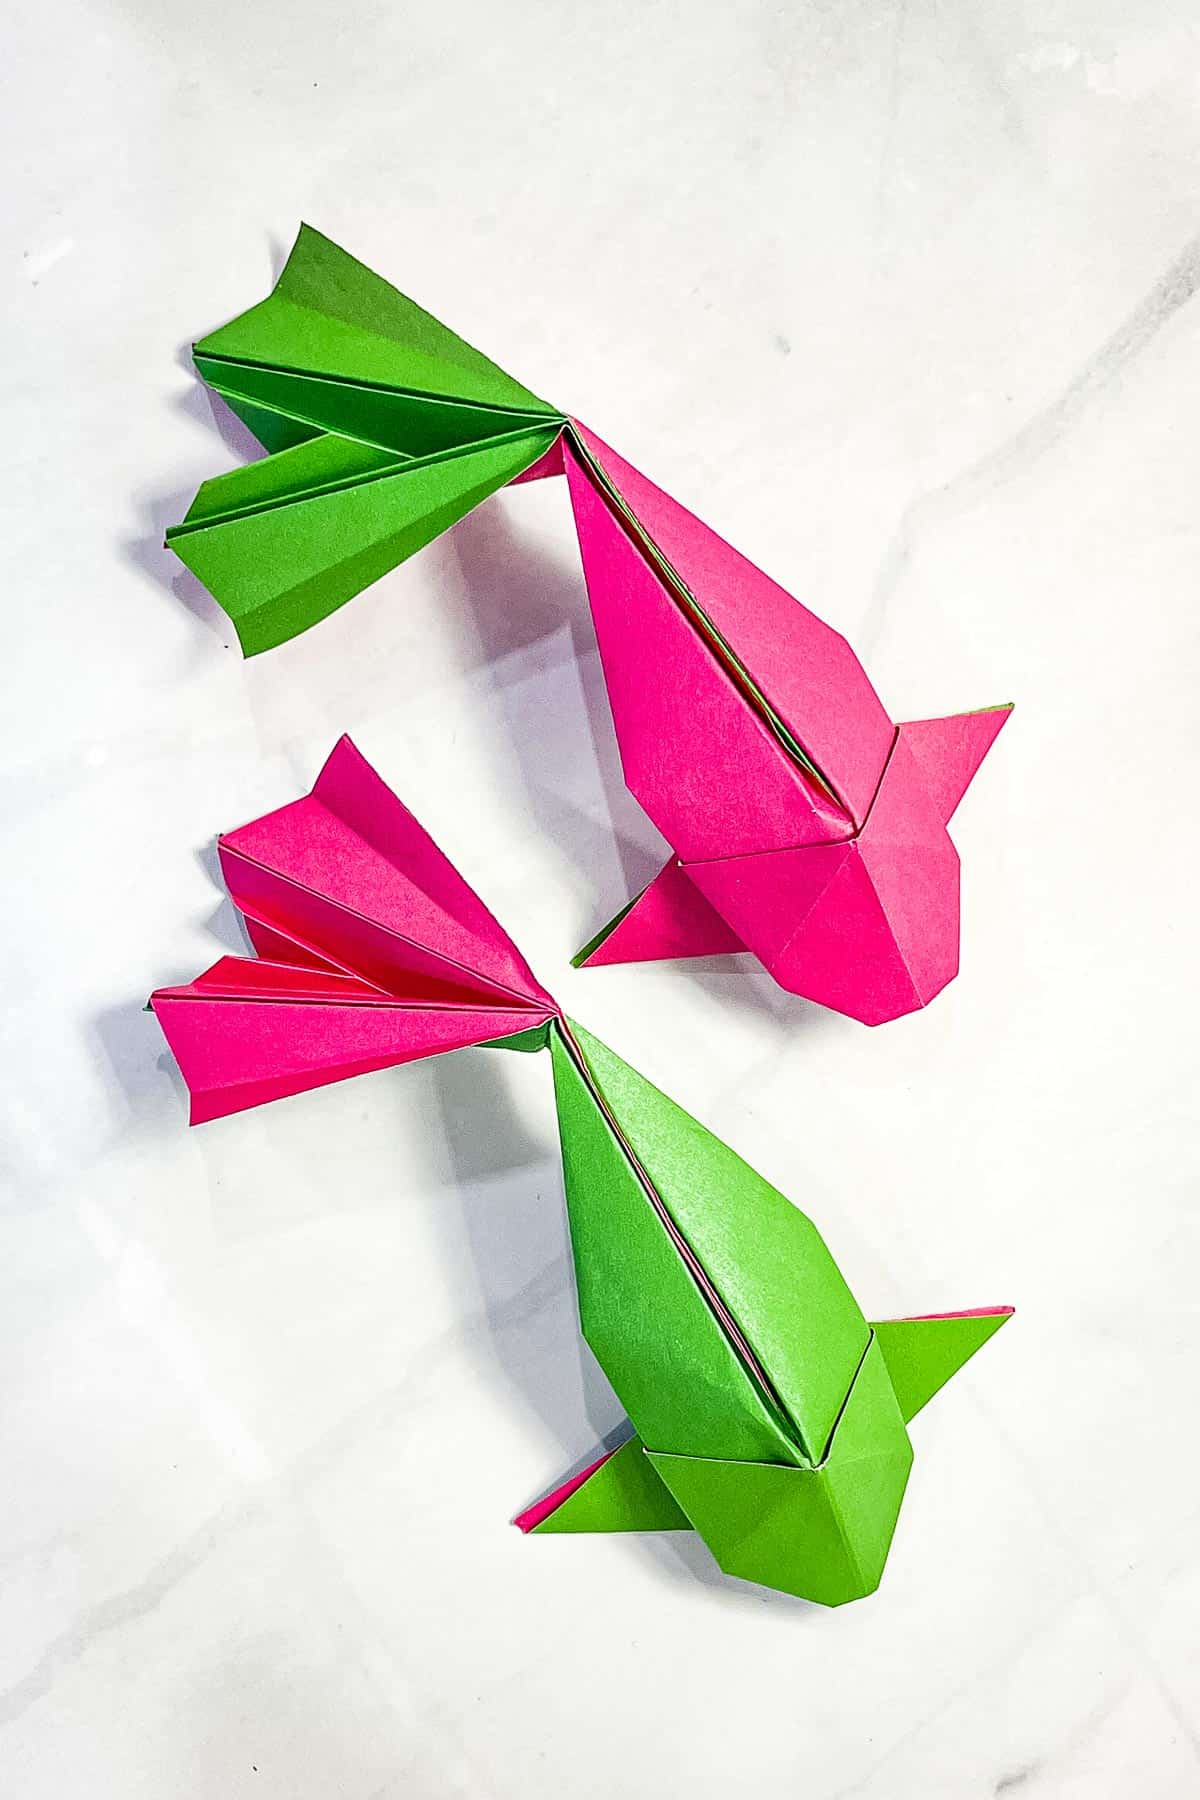 2 origami koi fish in pink and green.